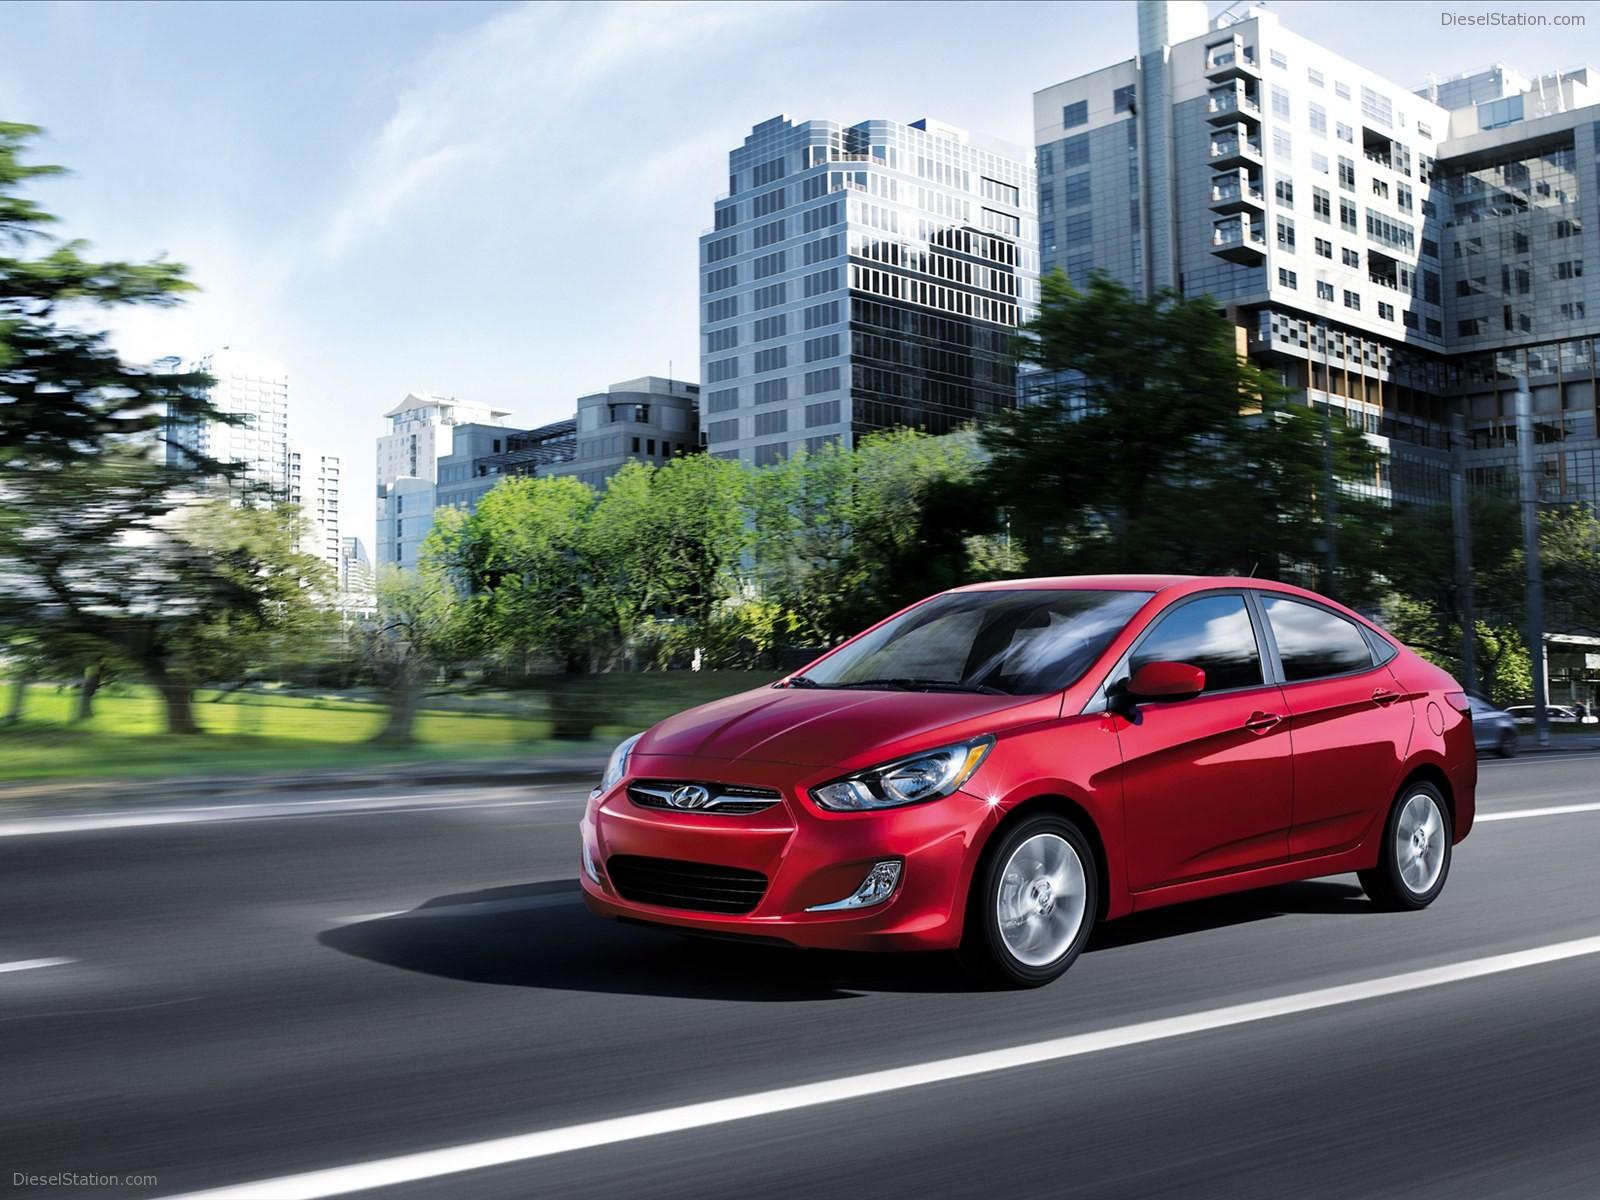 Hyundai Accent 2012 Exotic Car Picture of 44, Diesel Station